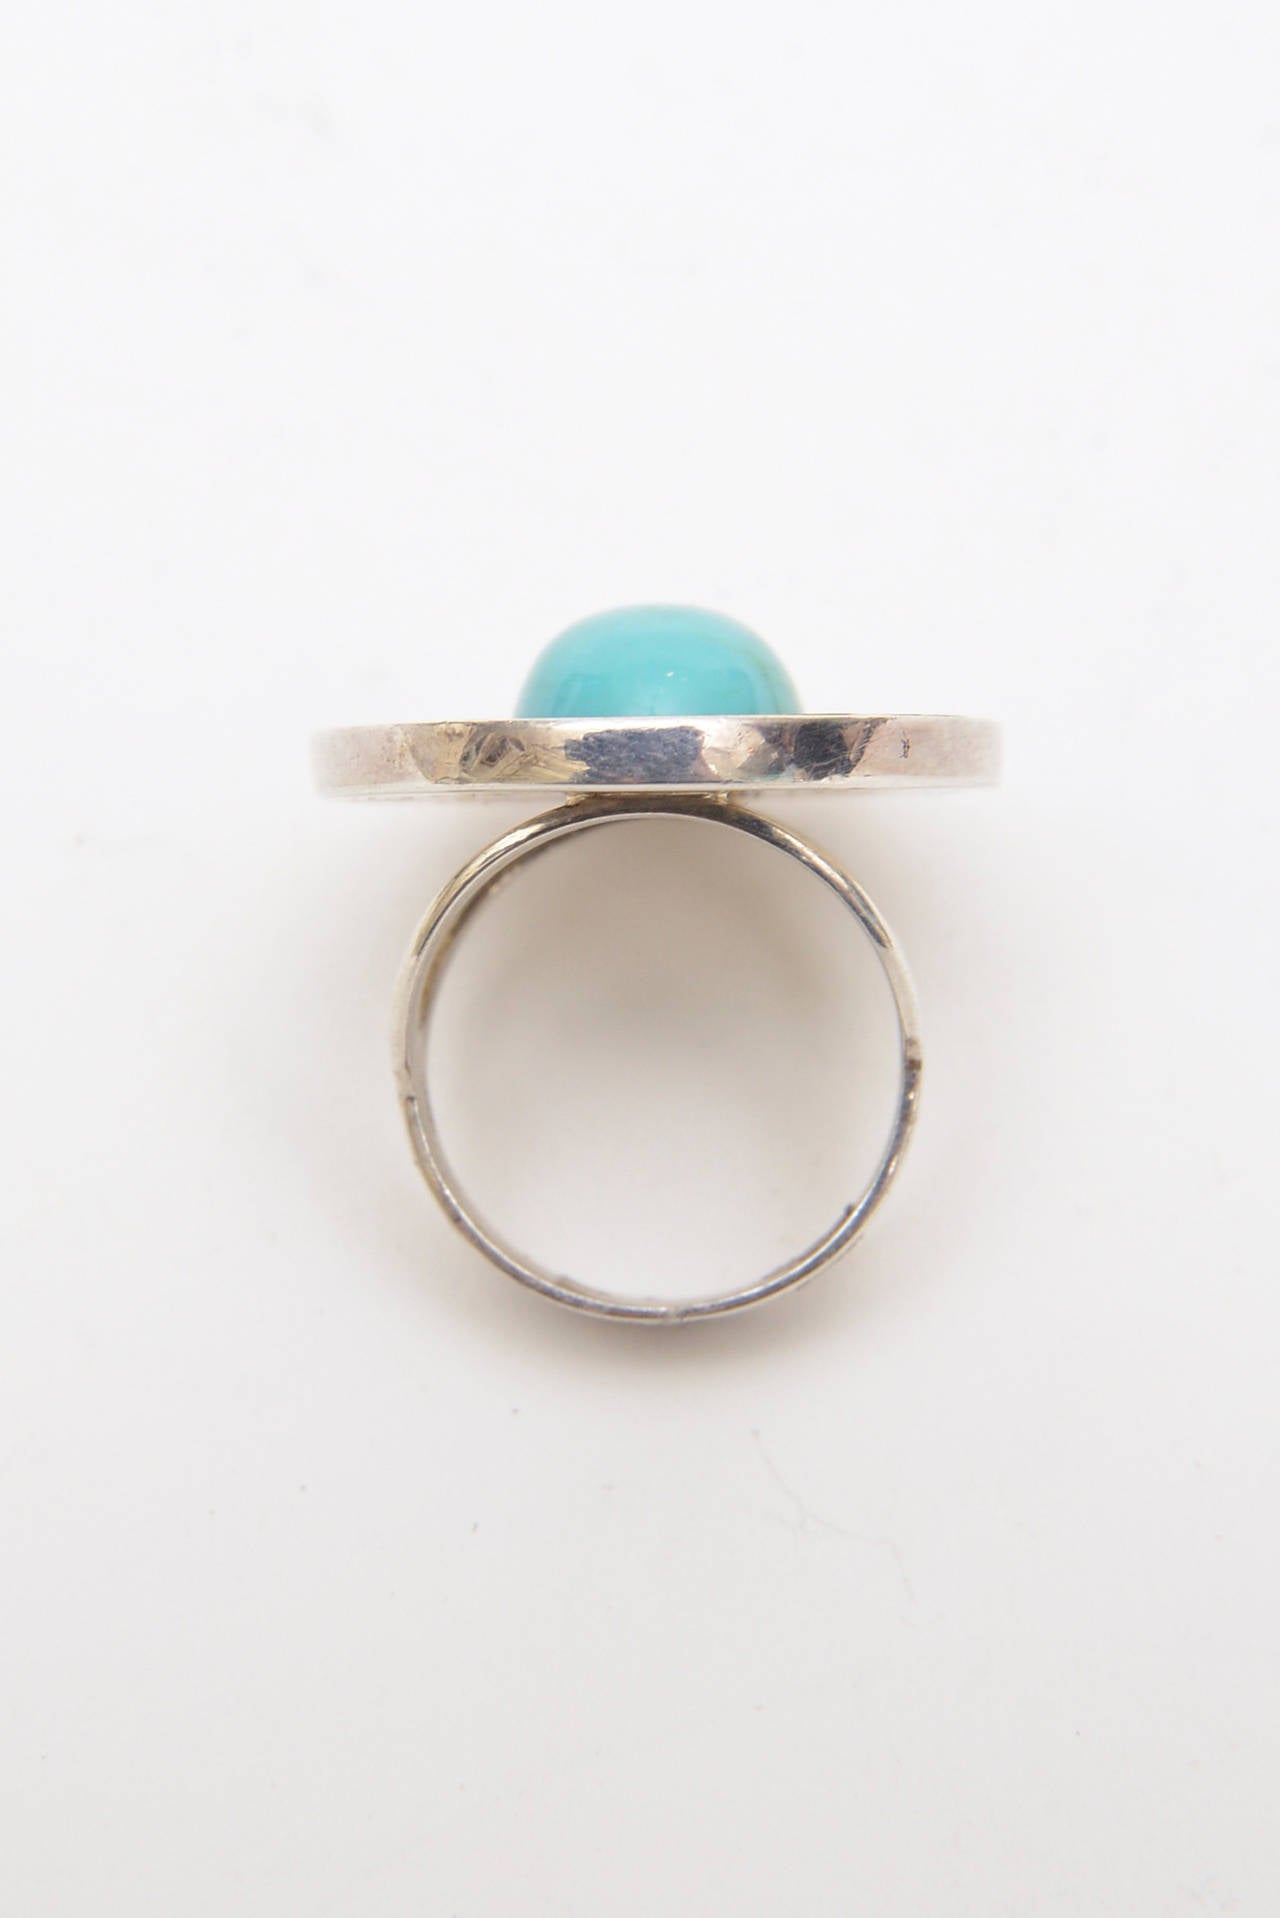  Sterling Silver and Turquoise Sculptural Ring 1